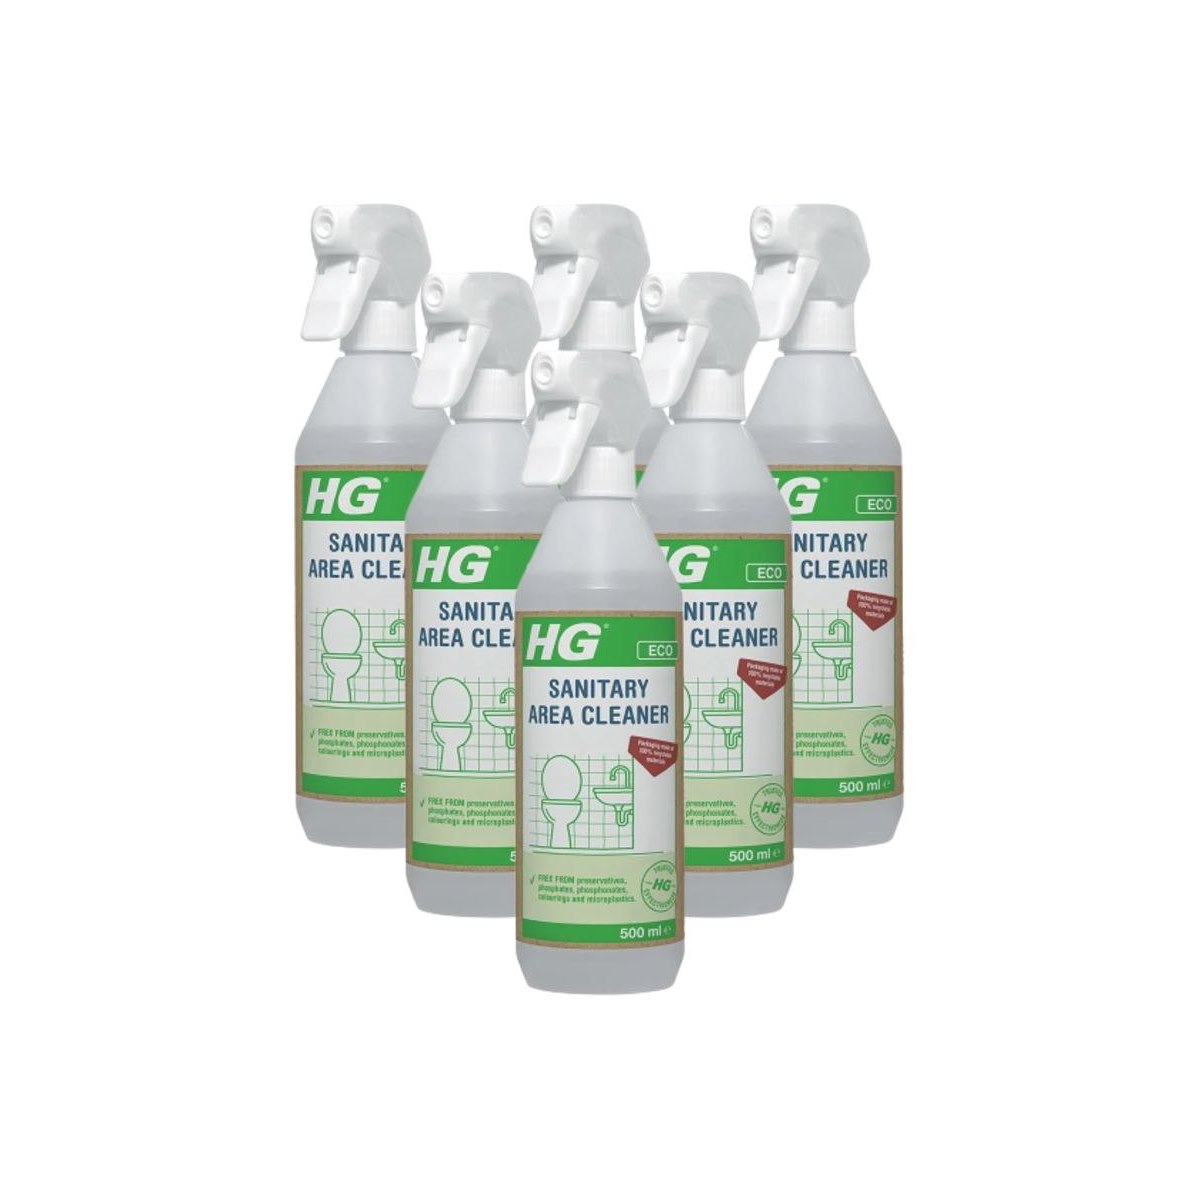 Case of 6 x HG Eco Sanitary Area Cleaner Spray 500ml